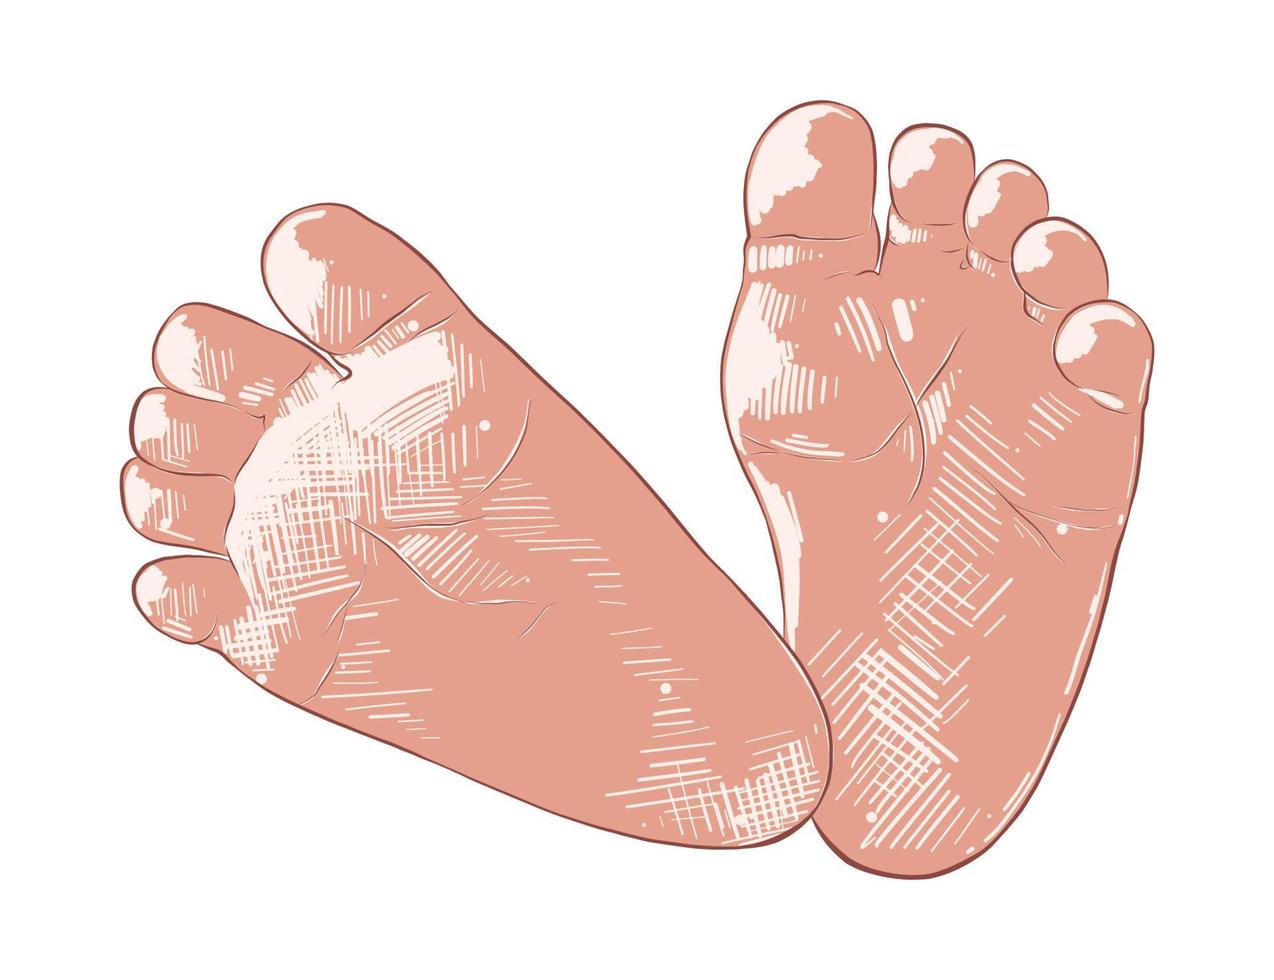 Vector engraved style illustration for posters, decoration and print. Hand drawn sketch of newborn baby foots print isolated on white background. Detailed vintage etching style drawing.